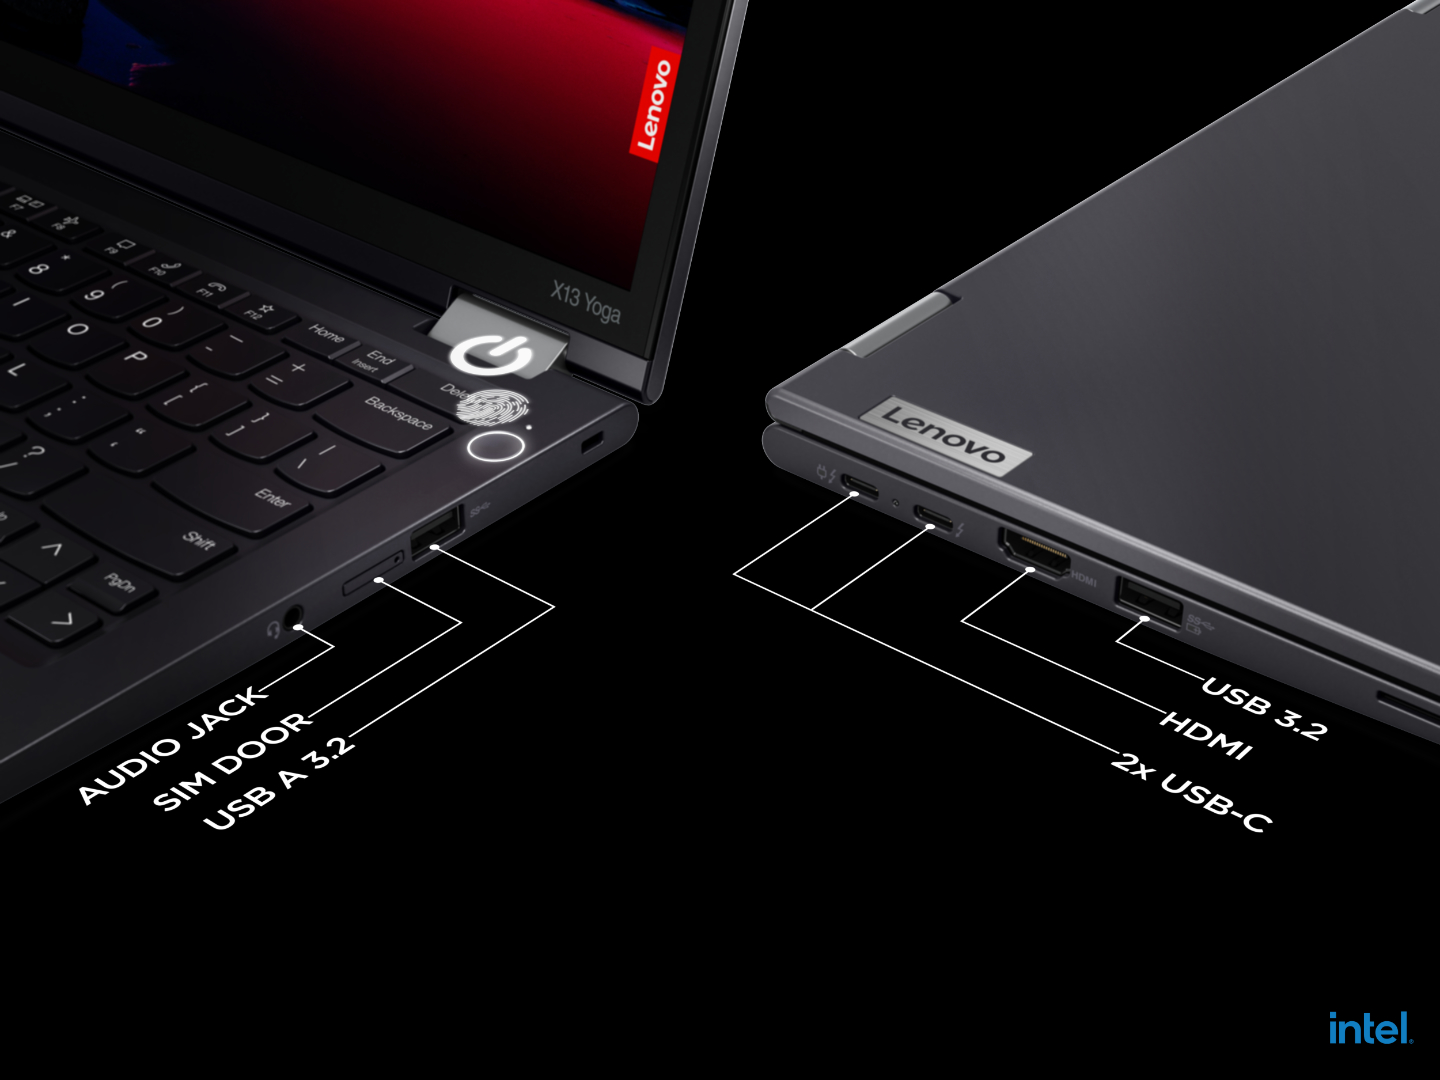 Lenovo ThinkPad X13 Yoga Gen 3: New 13.3-inch convertible unveiled with